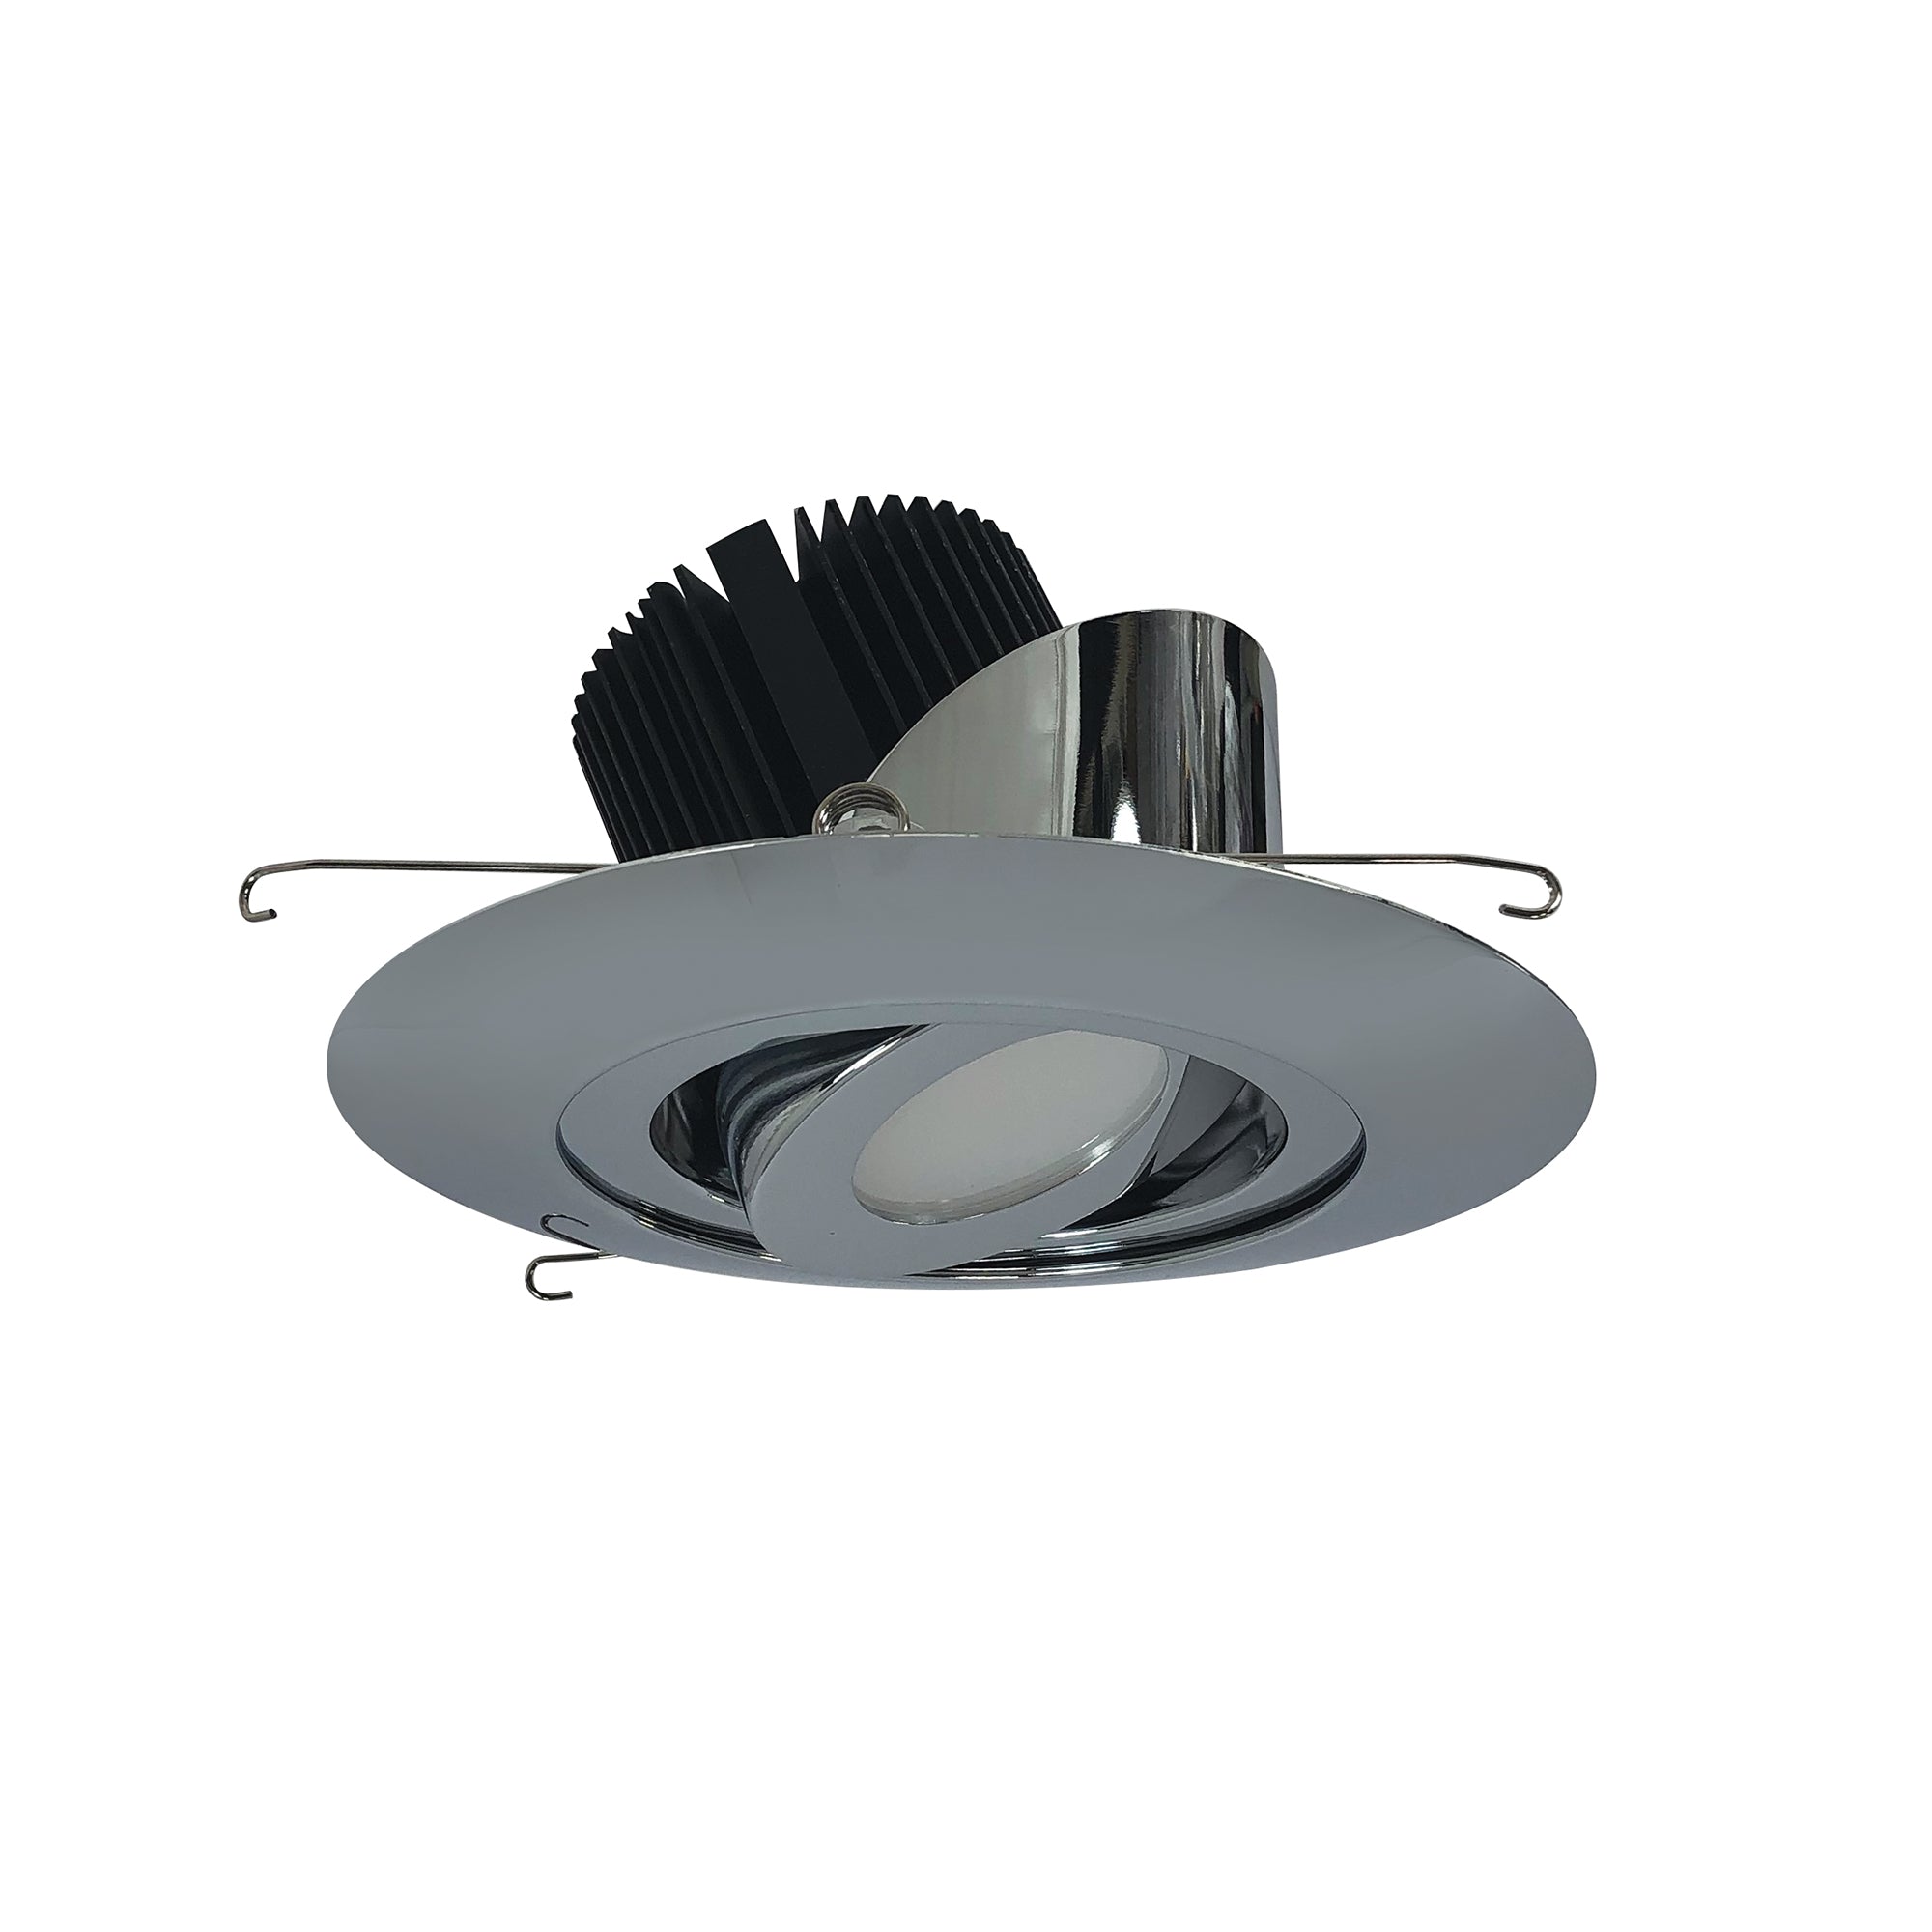 Nora Lighting NRM2-614L2527SC - Recessed - 6 Inch Marquise II Round Surface Adjustable Trim, Spot, 2500lm, 2700K, Chrome (Not Compatible with NHRM2-625 Housings)